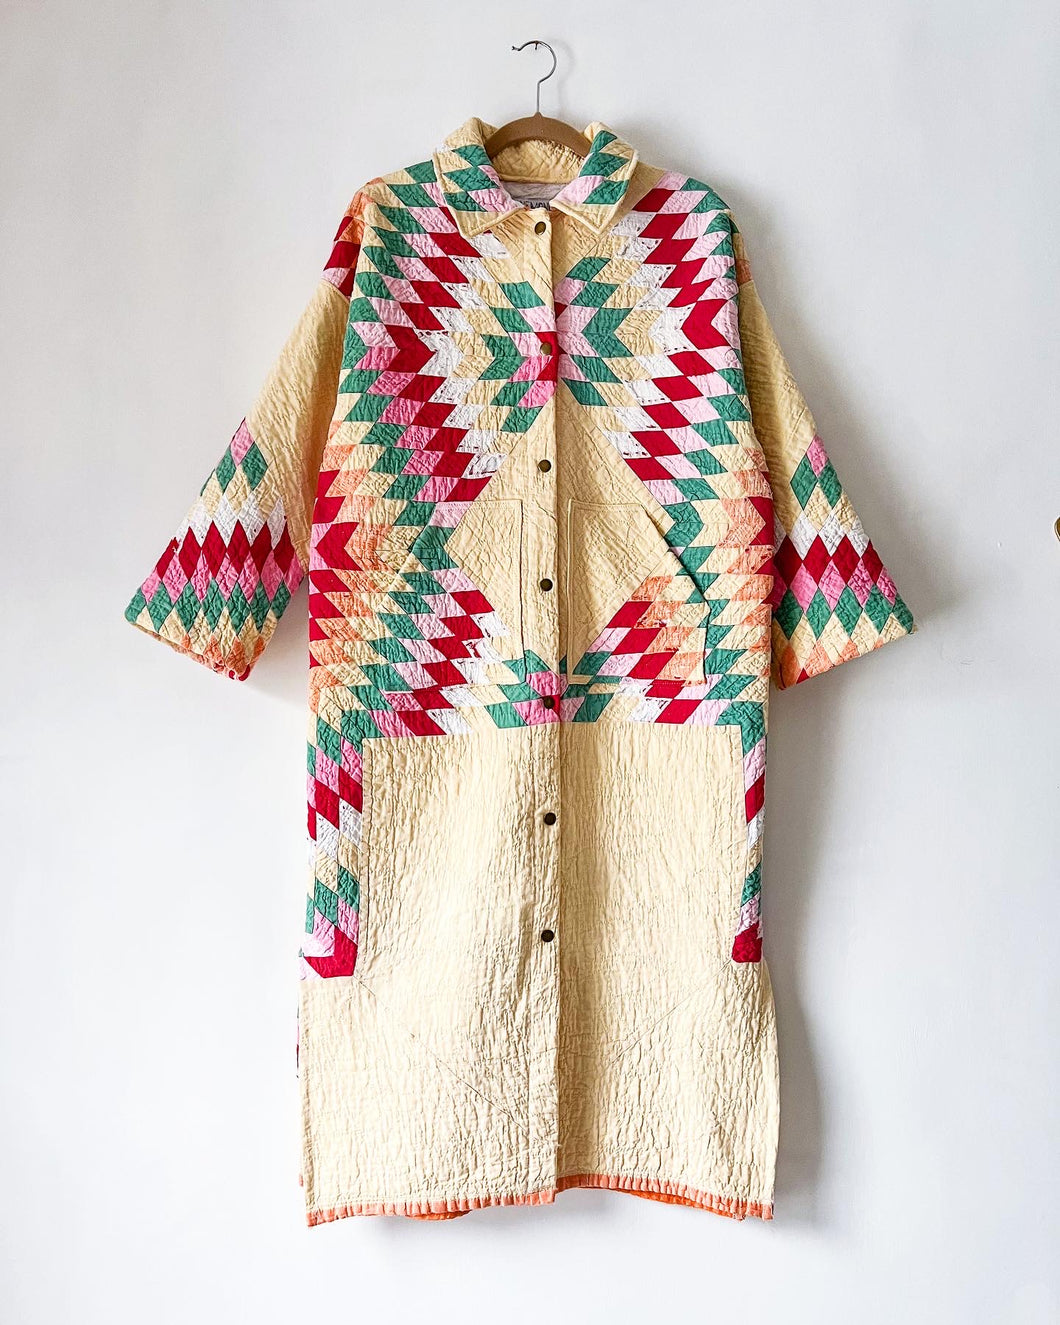 One-of-a-Kind: Broken Star Duster Chore Coat